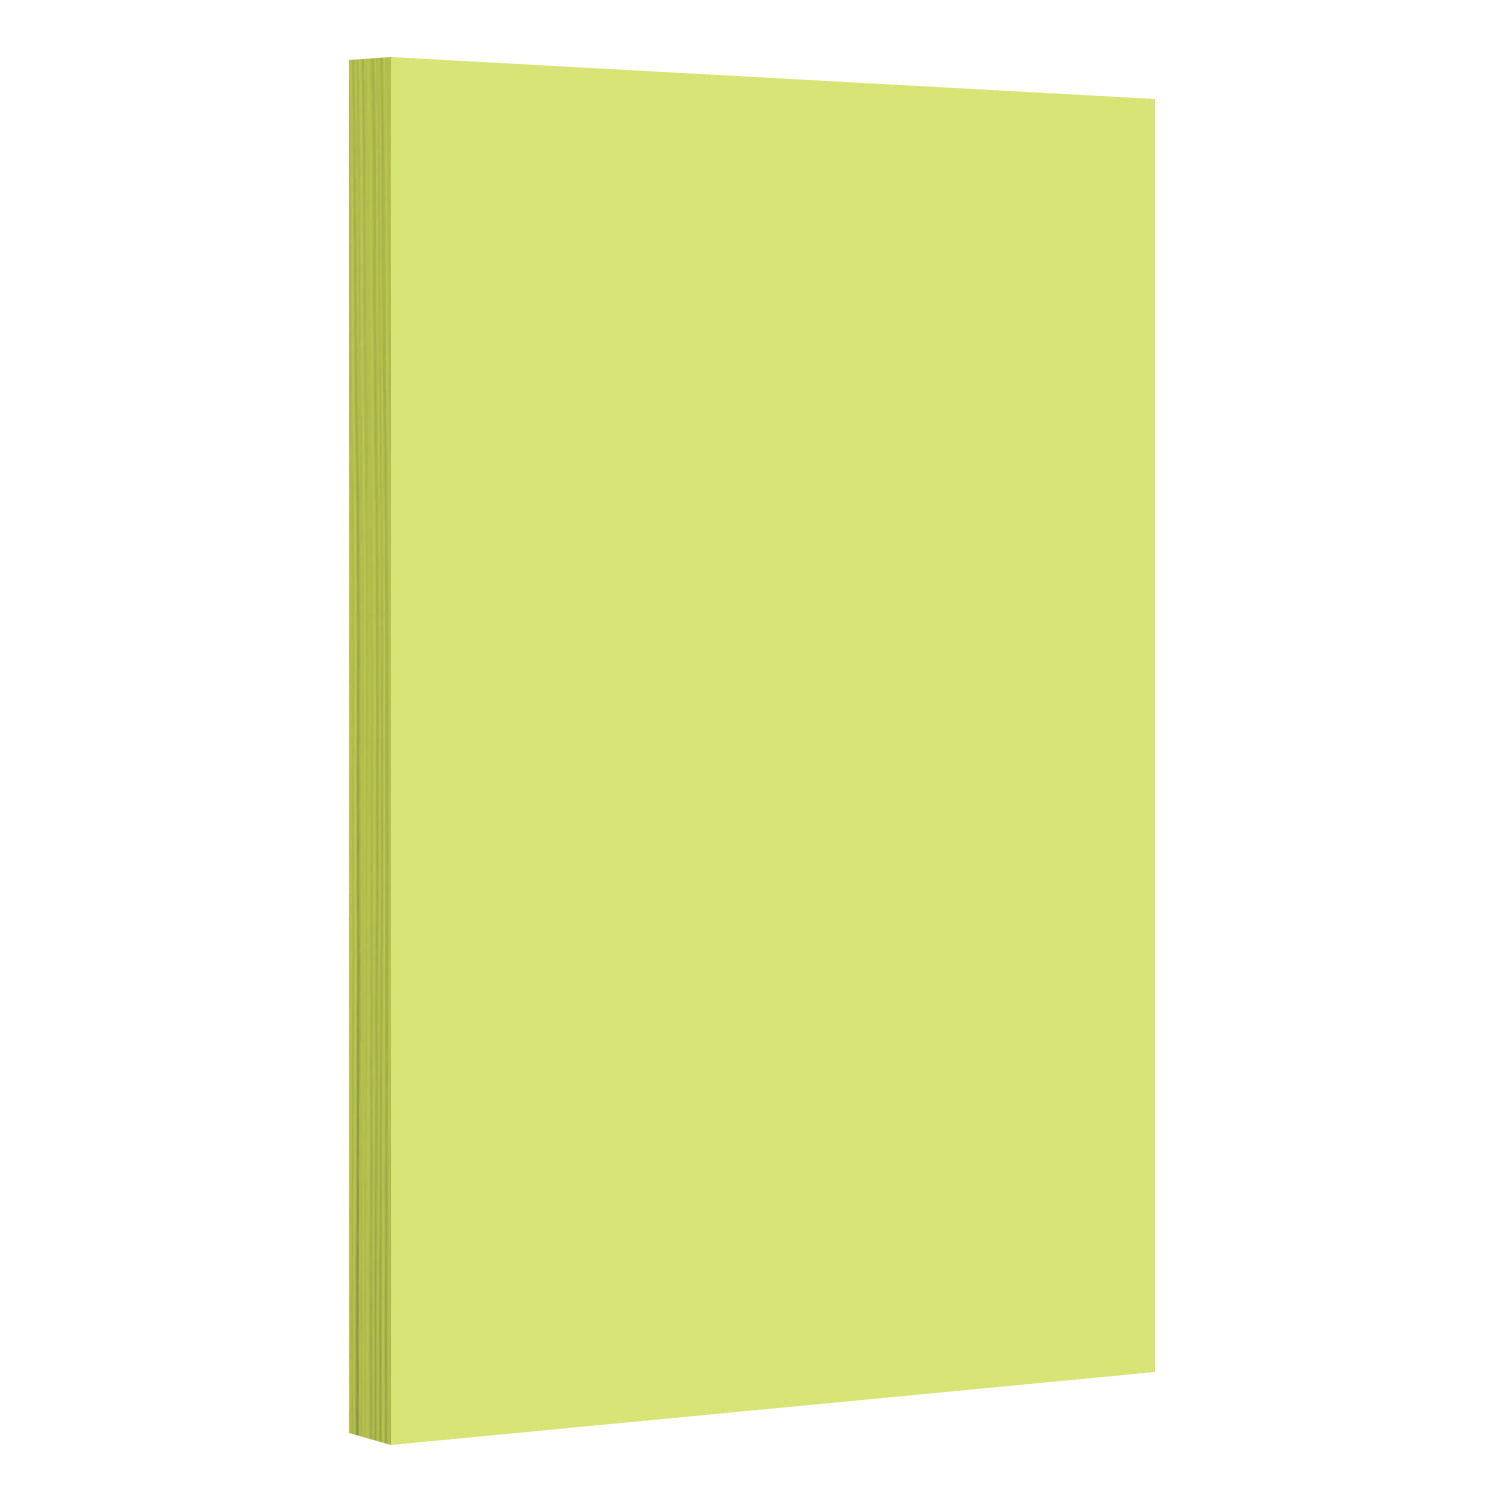 Cream Pastel Color Card Stock, 67Lb Cover Cardstock, 8.5 x 14 Inches